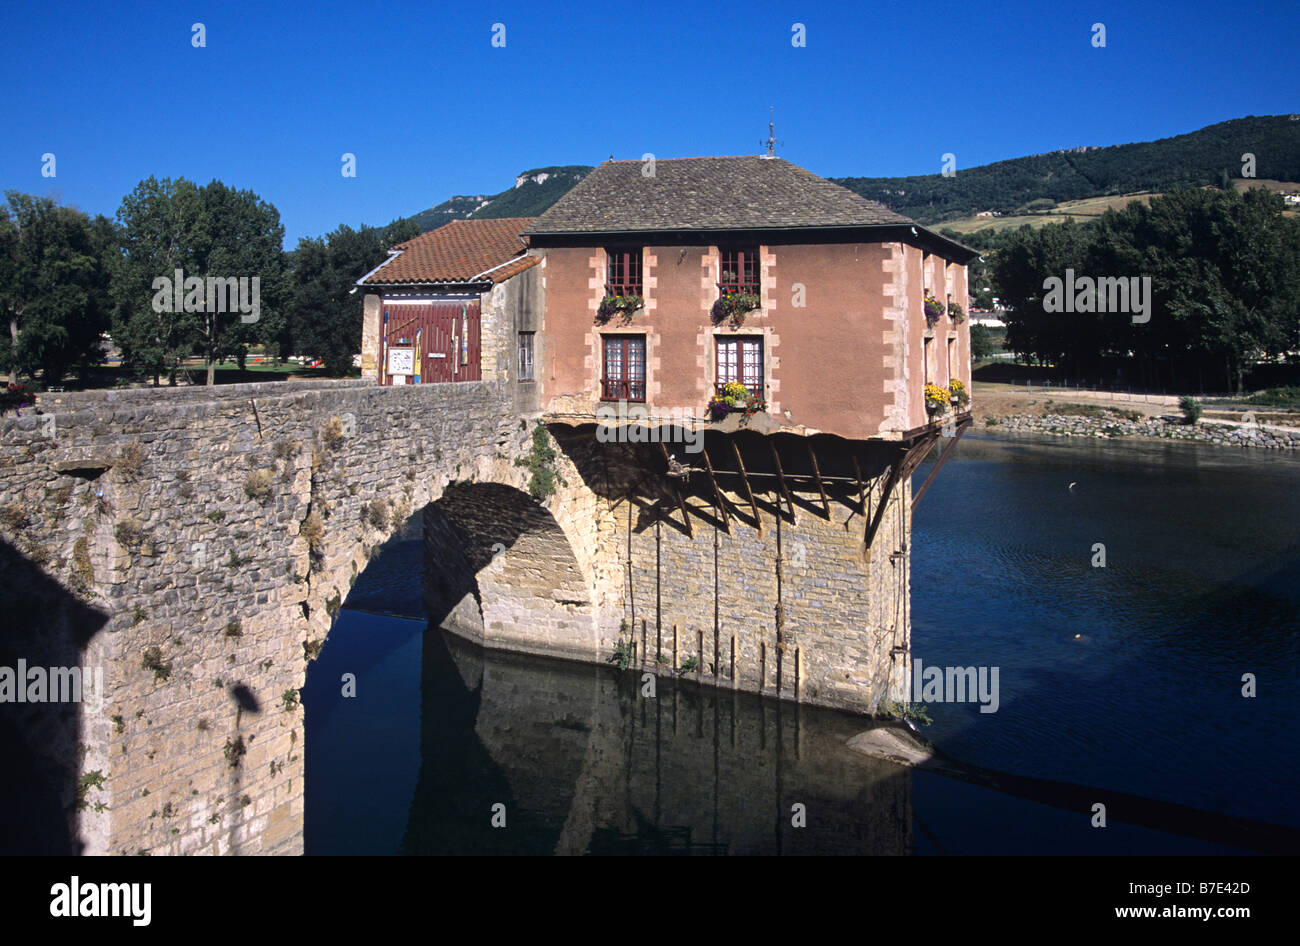 Old Watermill or Water Mill (c15th) and Bridge House on River Tarn, Millau, Aveyron Département, France Stock Photo